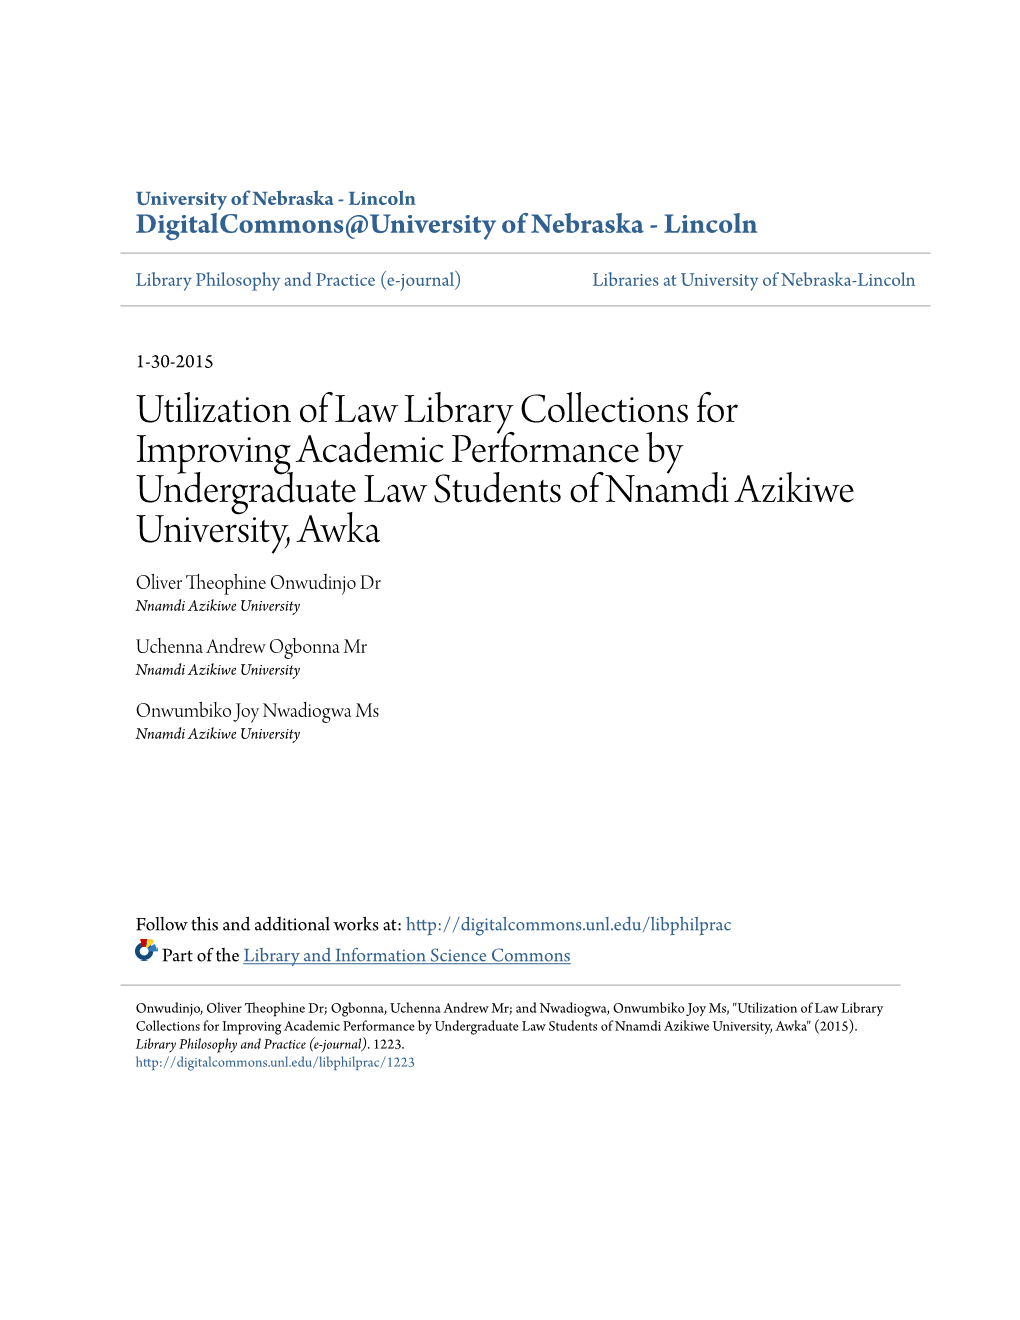 Utilization of Law Library Collections for Improving Academic